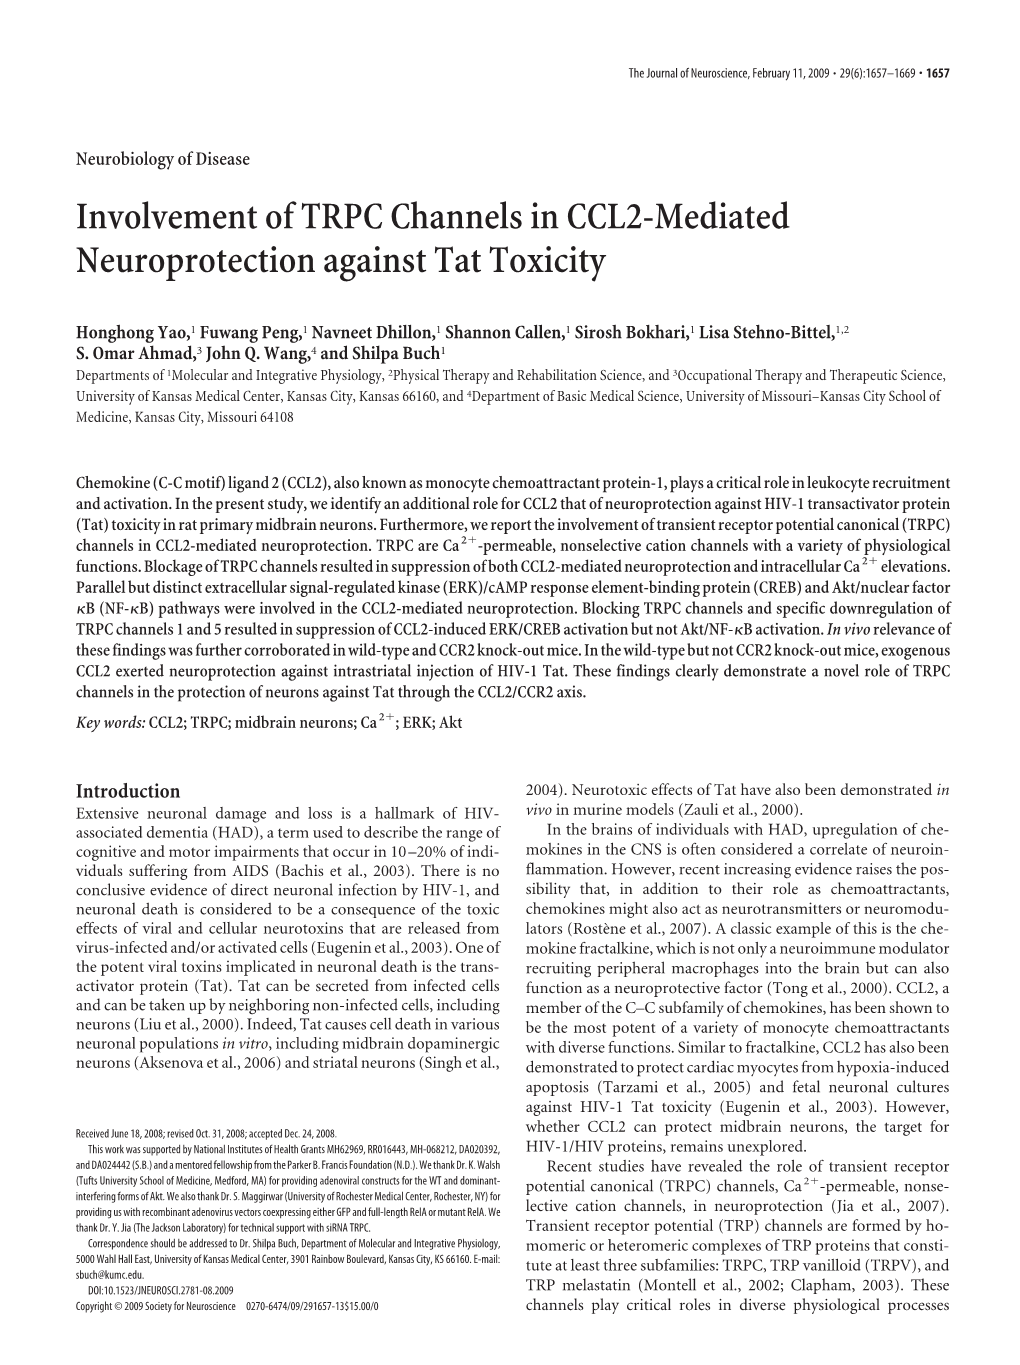 Involvement of TRPC Channels in CCL2-Mediated Neuroprotection Against Tat Toxicity